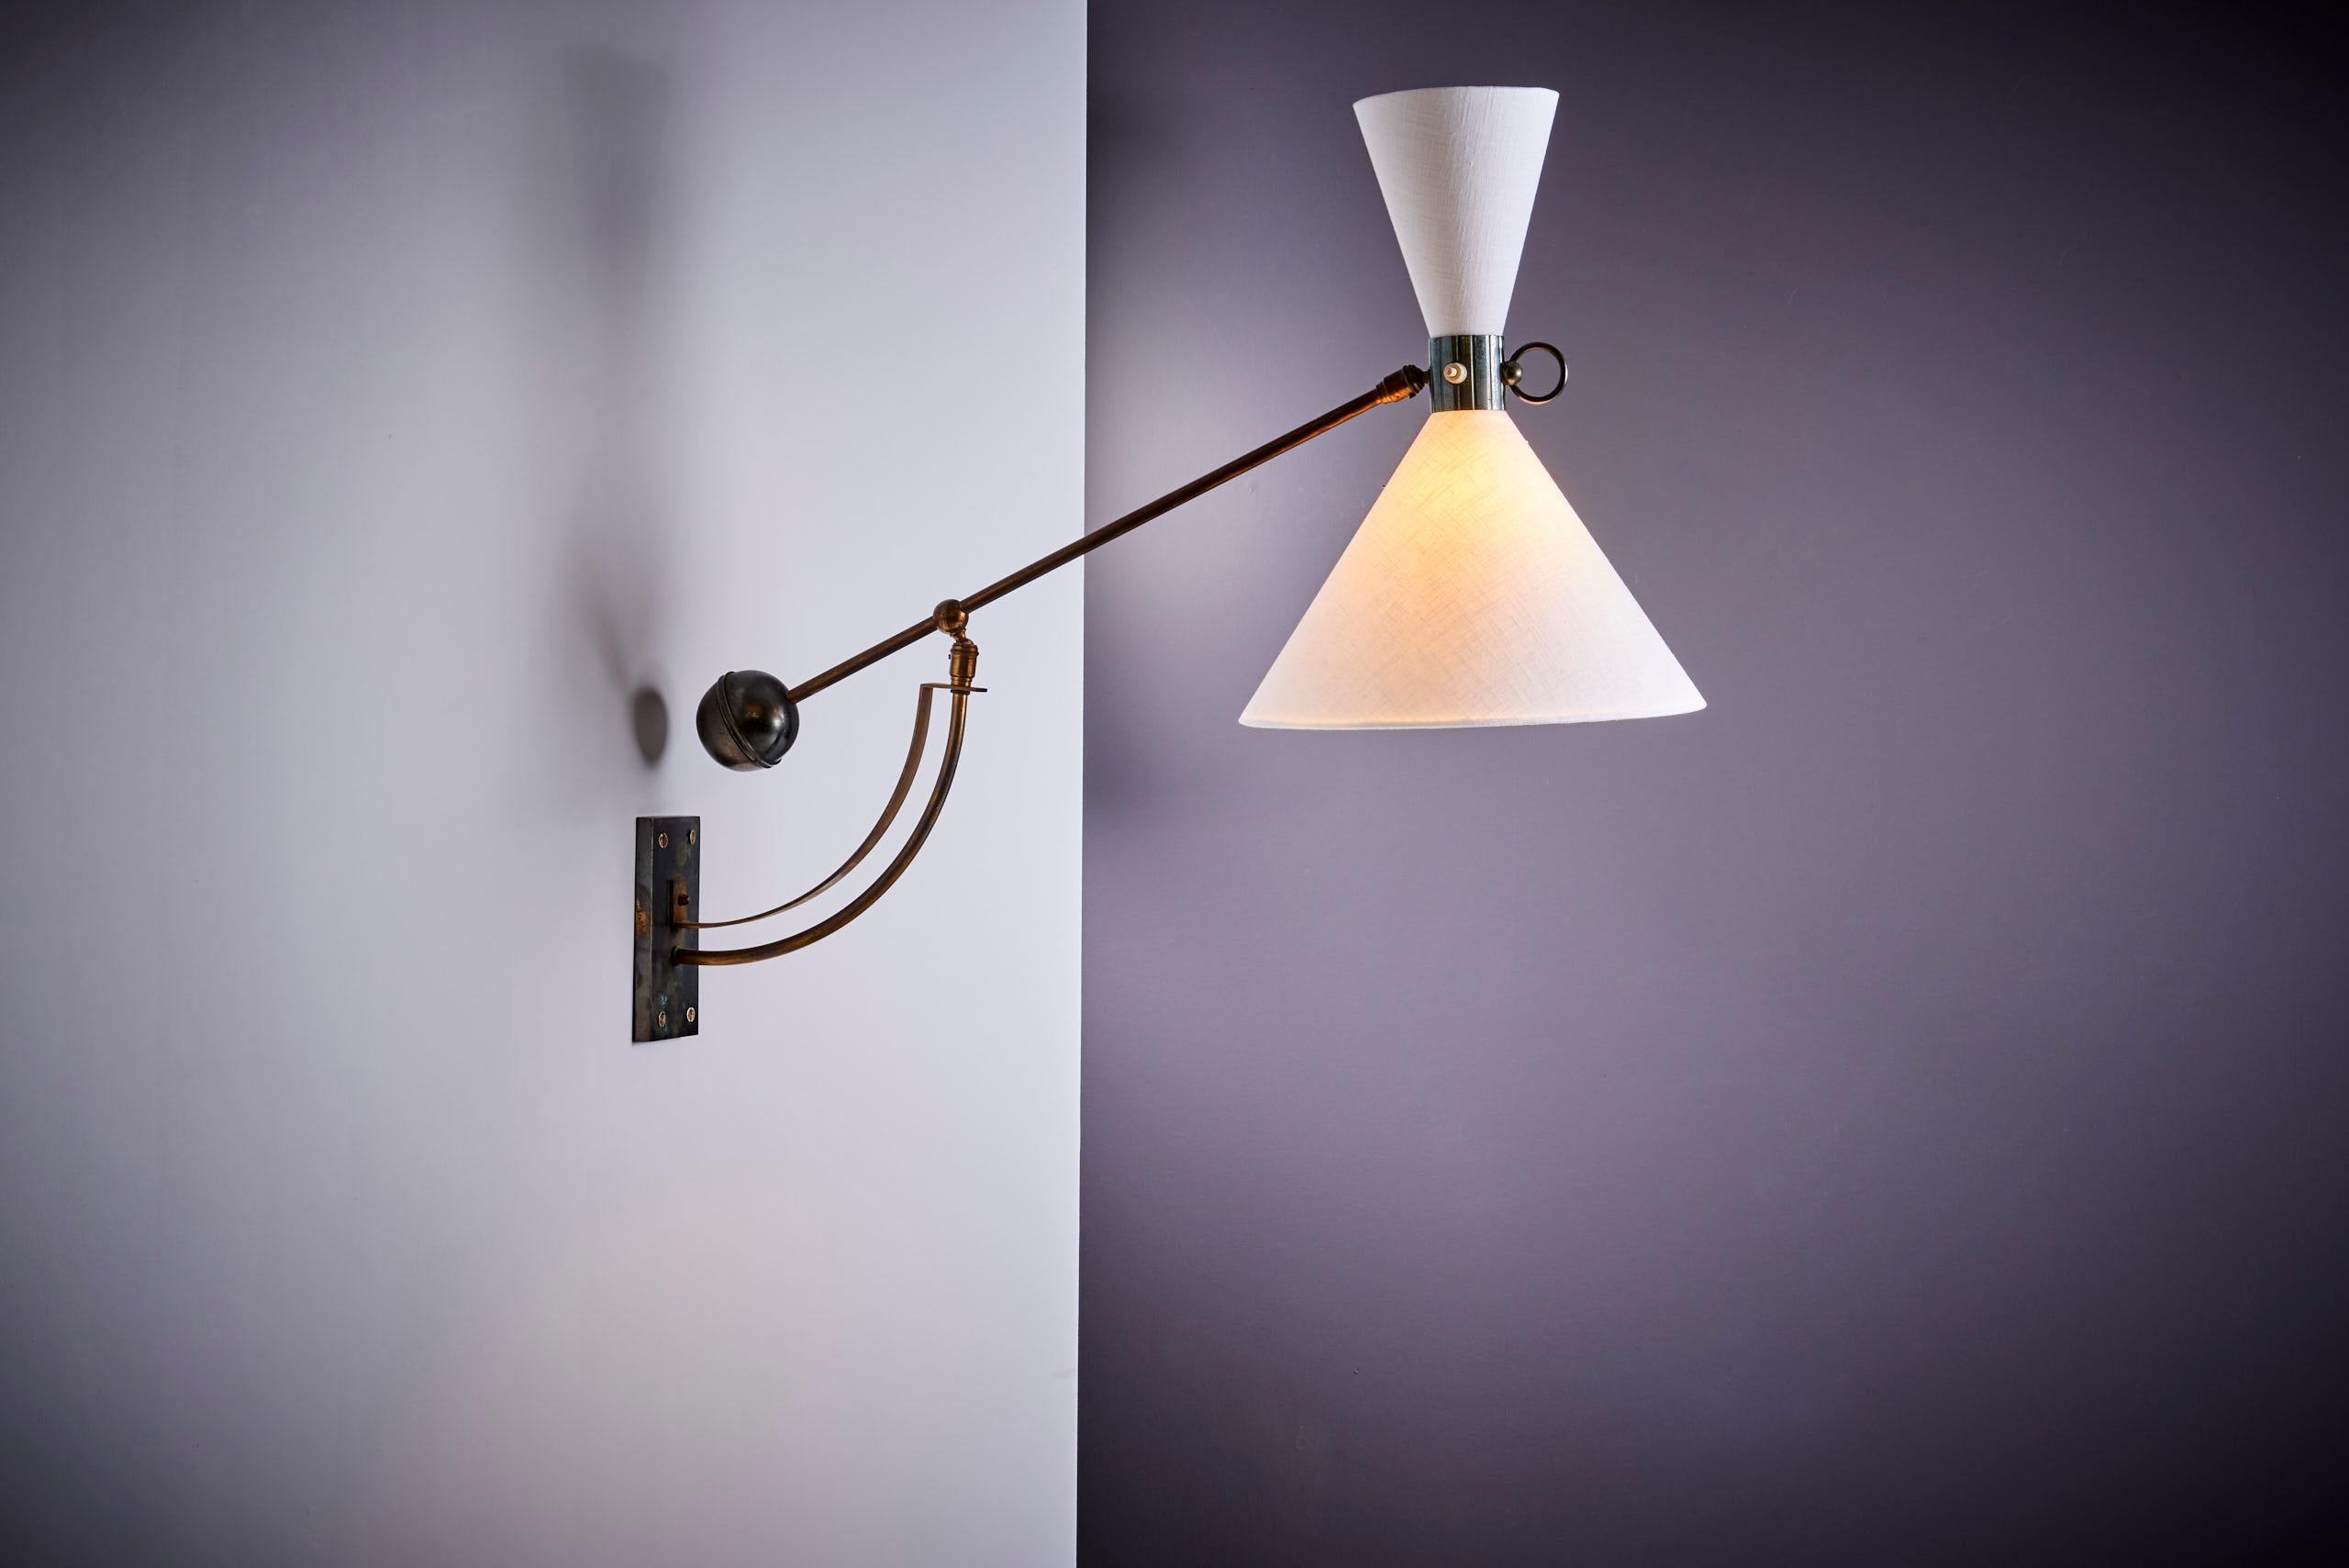 Counterweight Wall Lamp, France - 1950s with beautiful patina. The measurements given apply to the lamp including the shade. The height is adjustable. 